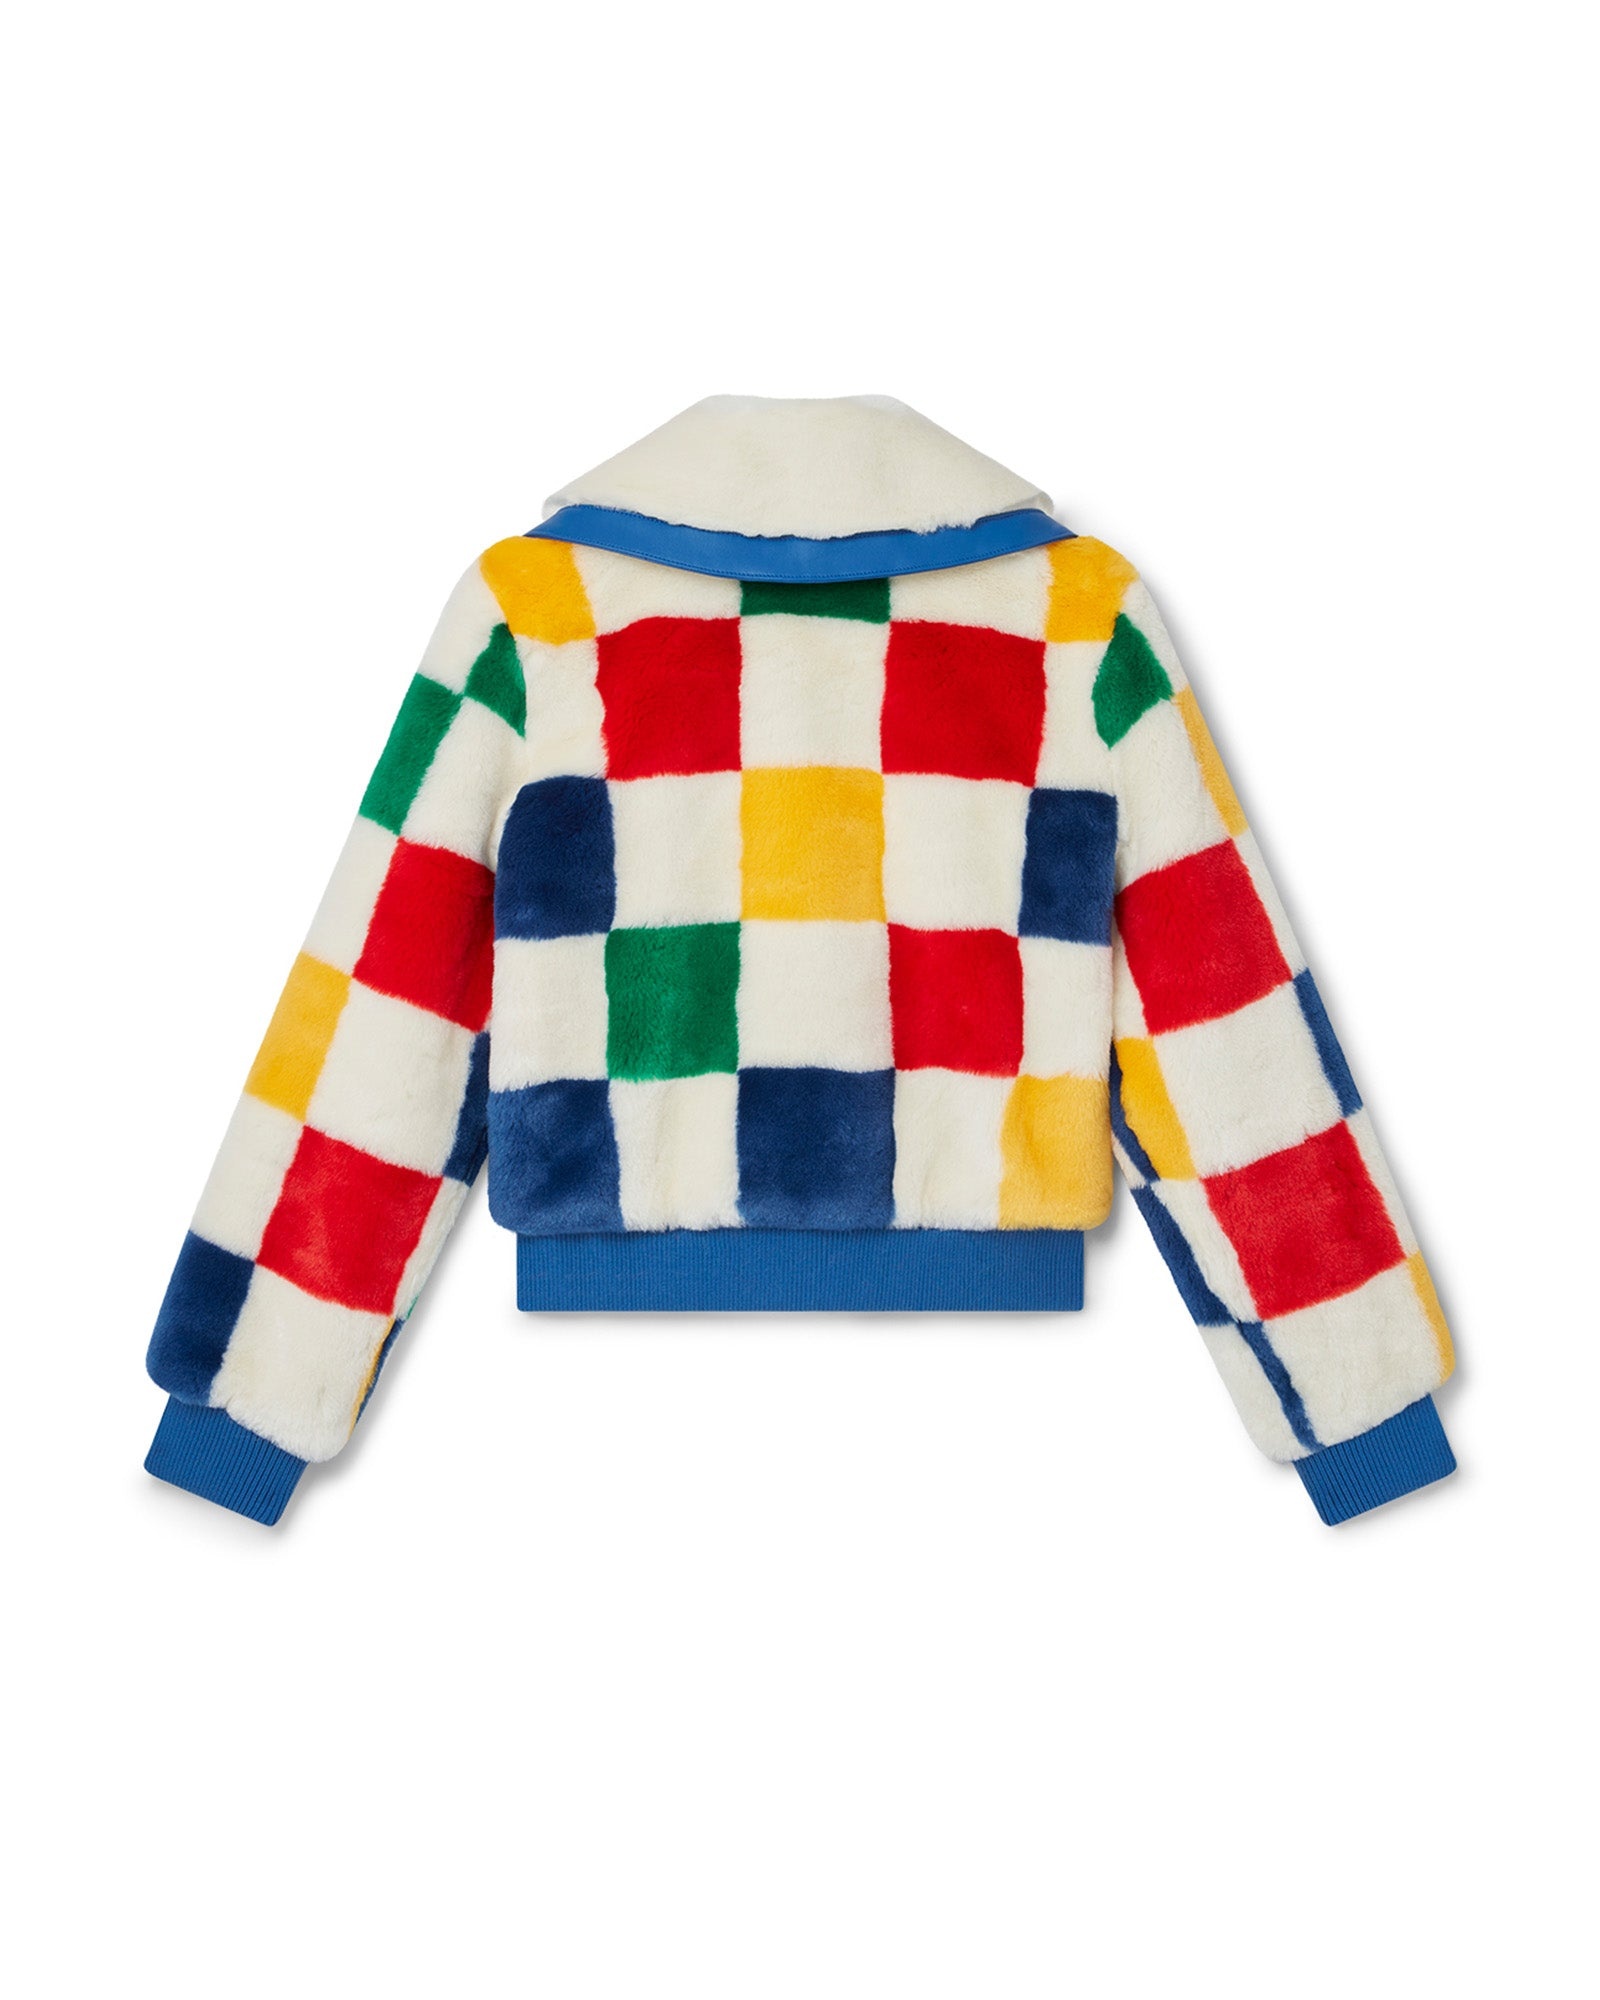 Primary Check Jacket - 2